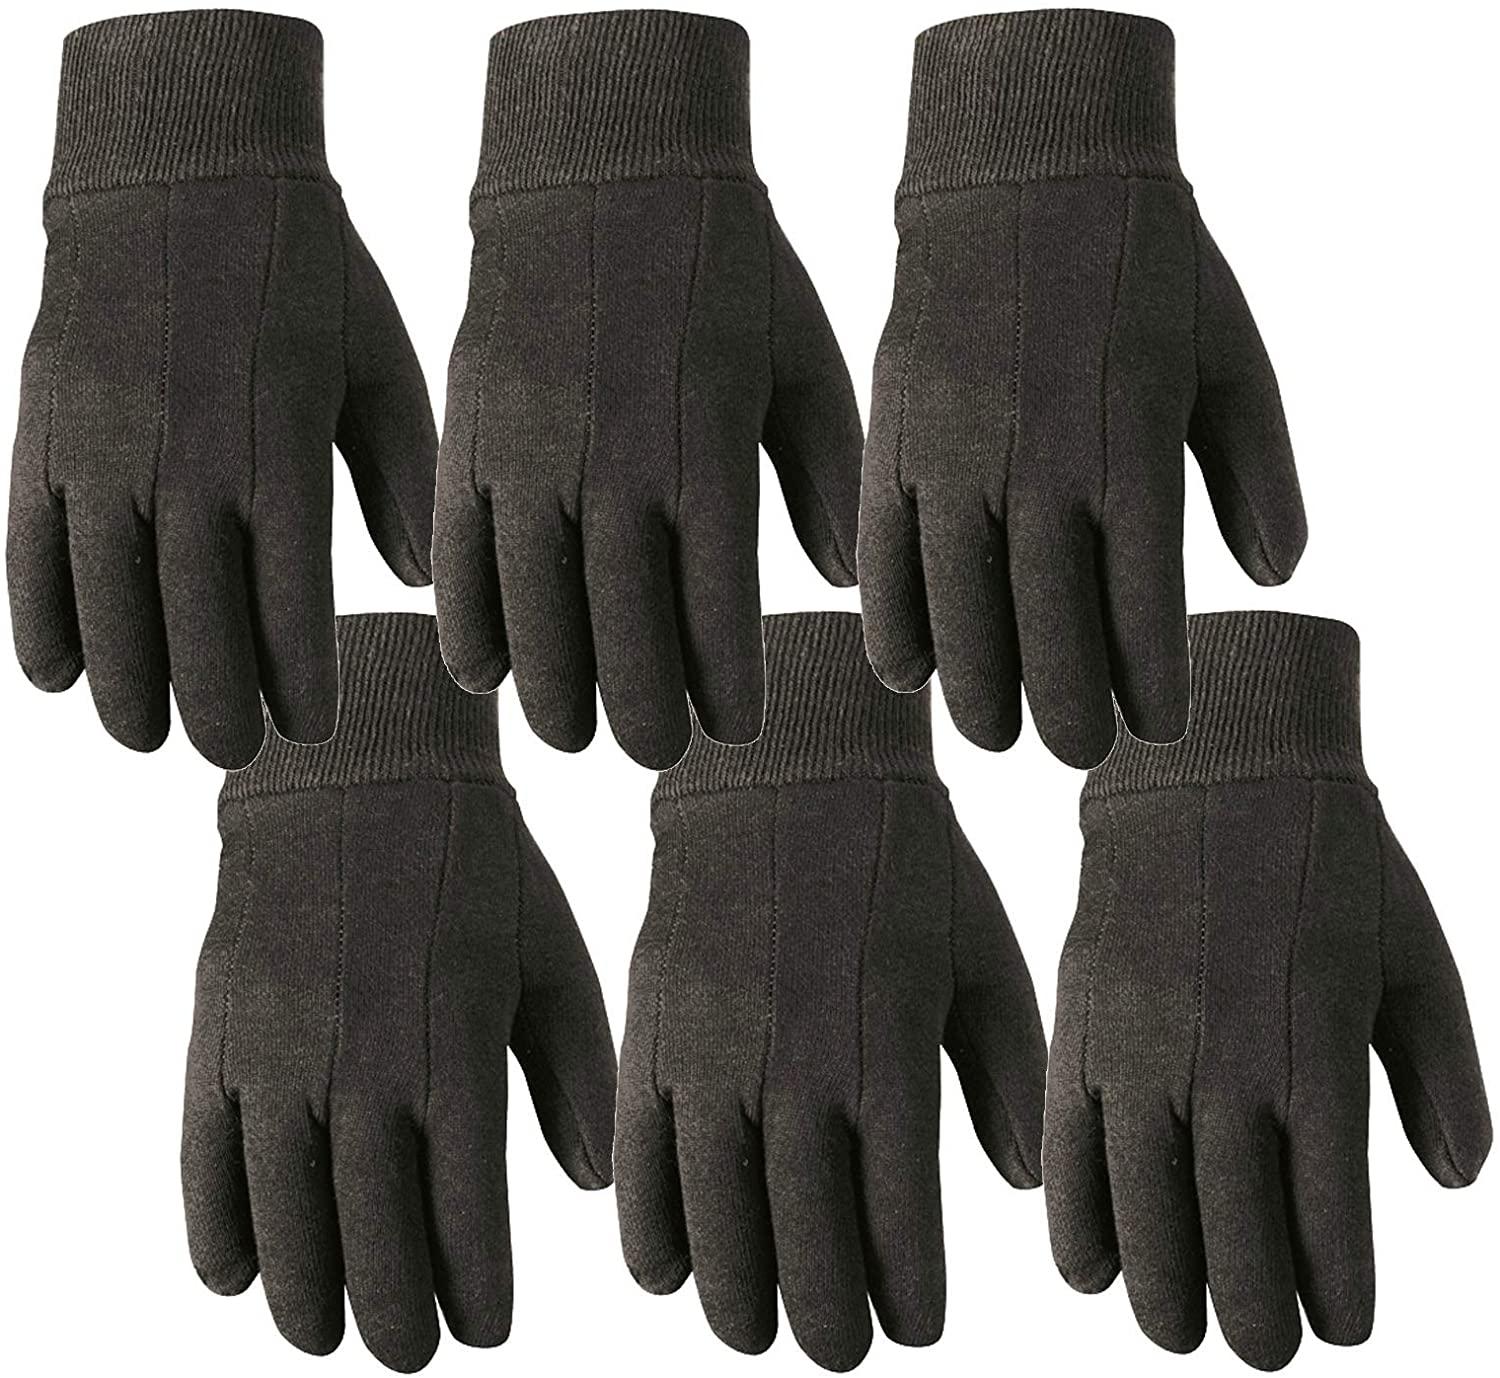 Wells Lamont Jersey Cotton Work Gloves for $4.26